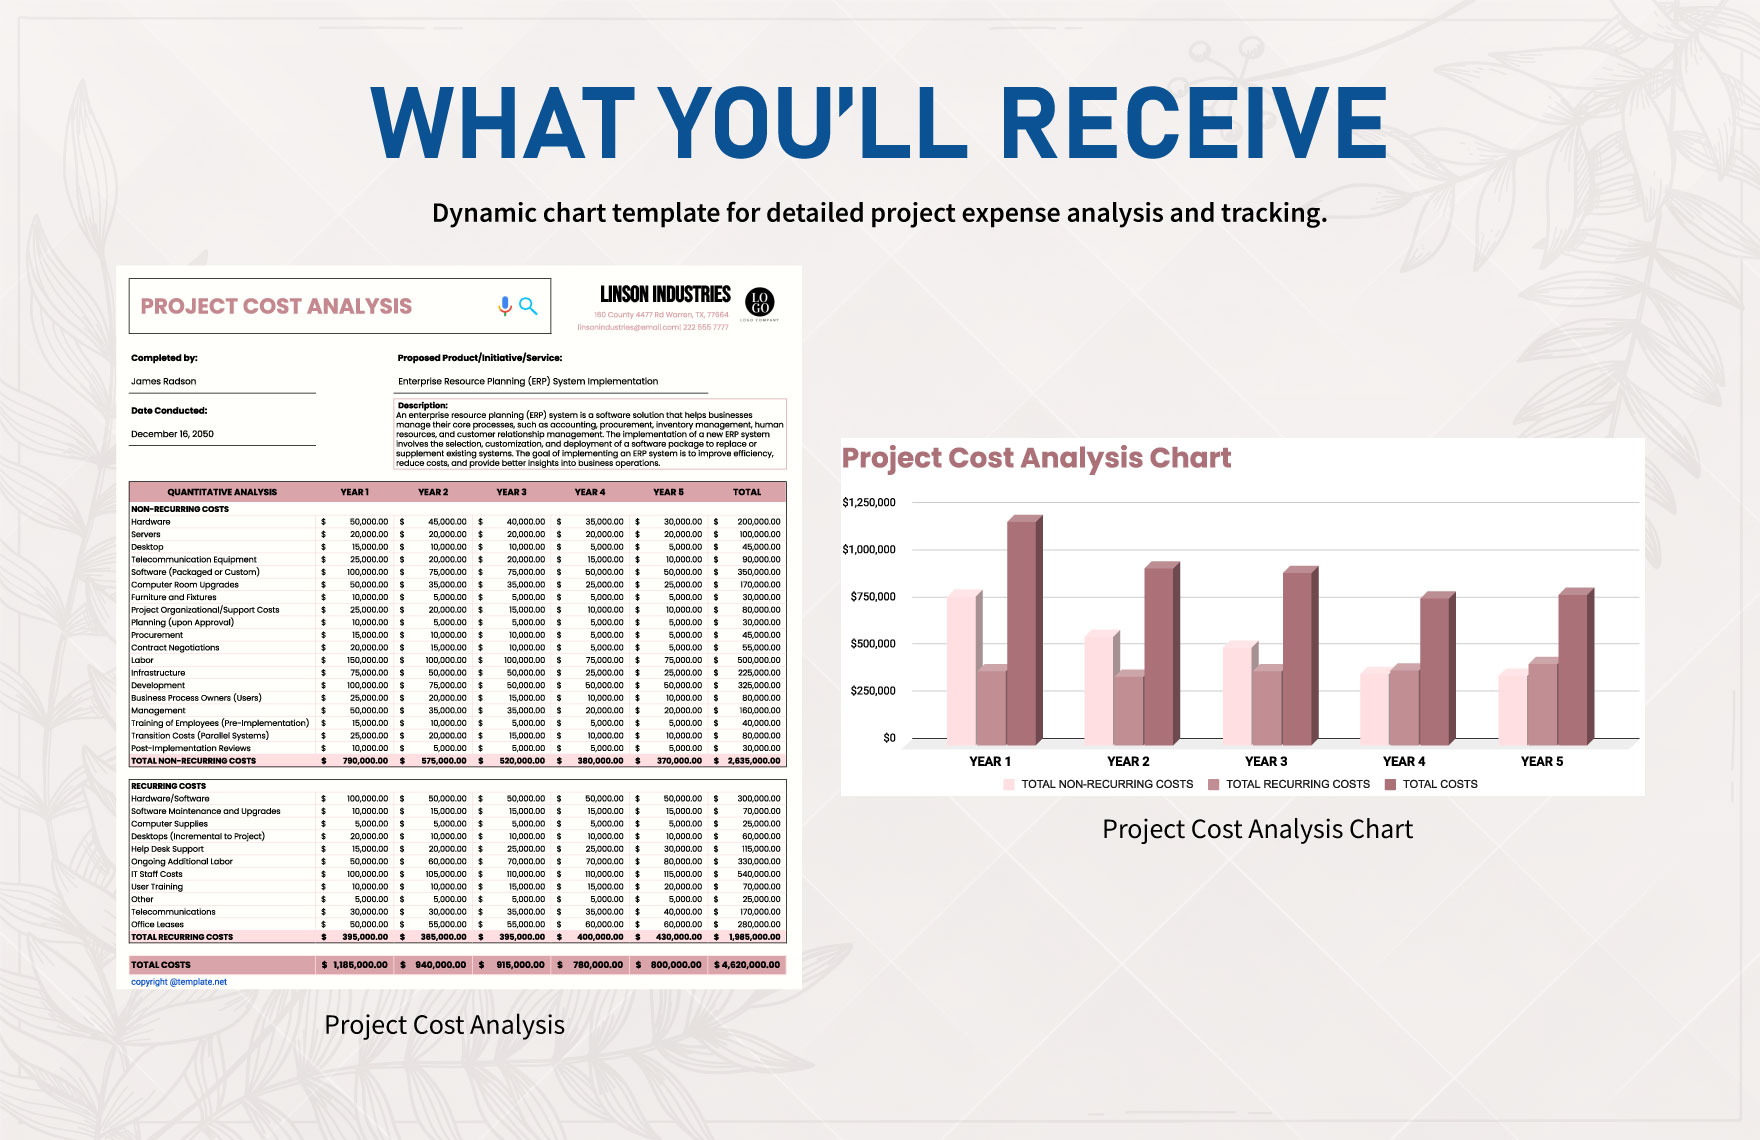 Project Cost Analysis Chart Template